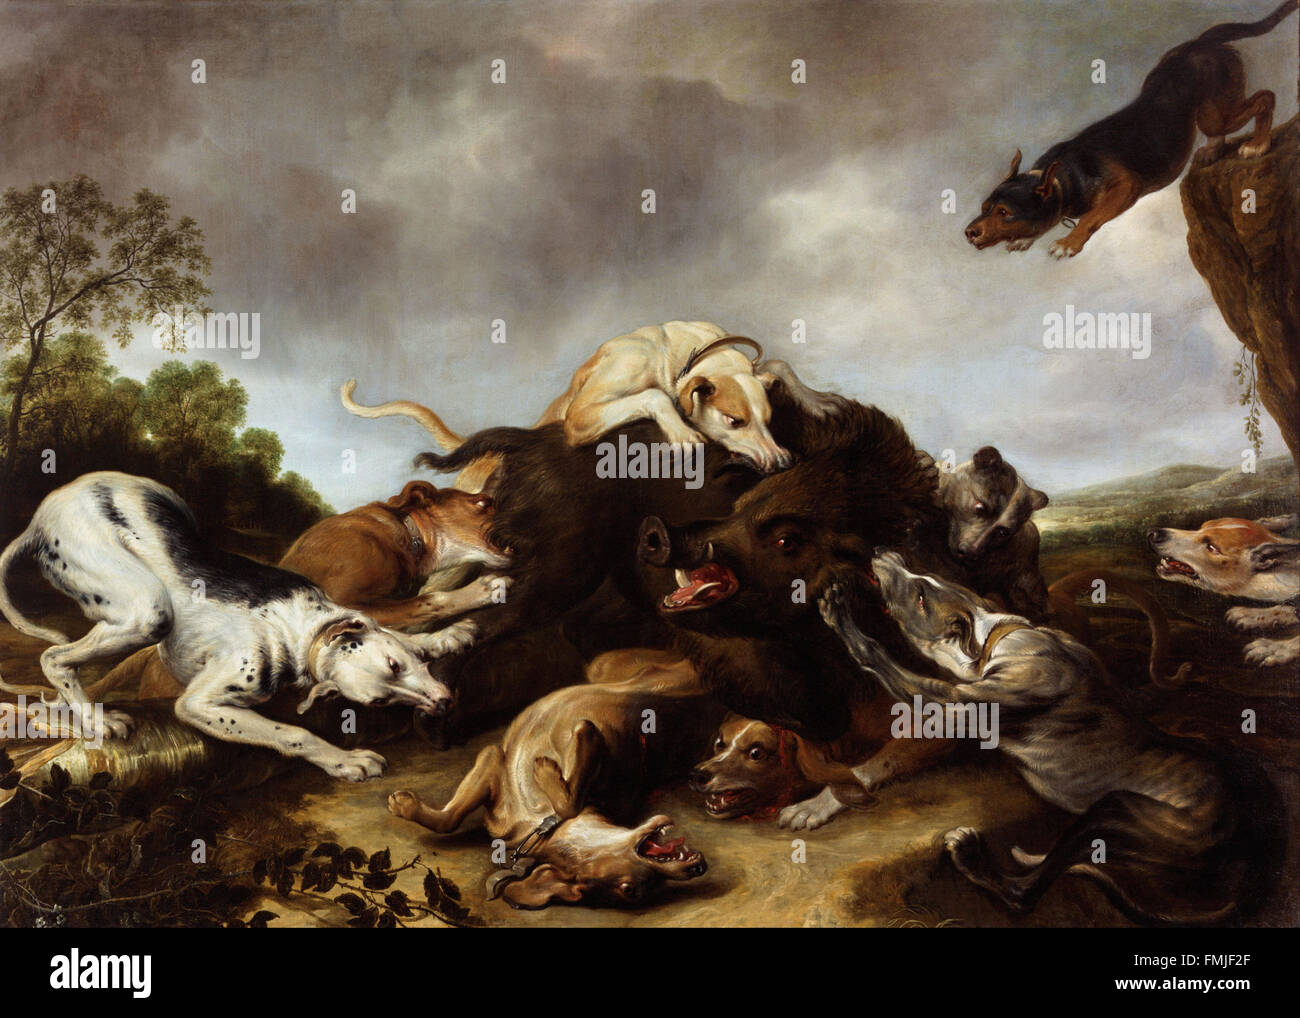 Frans Snyders and workshop - The boar hunt Stock Photo